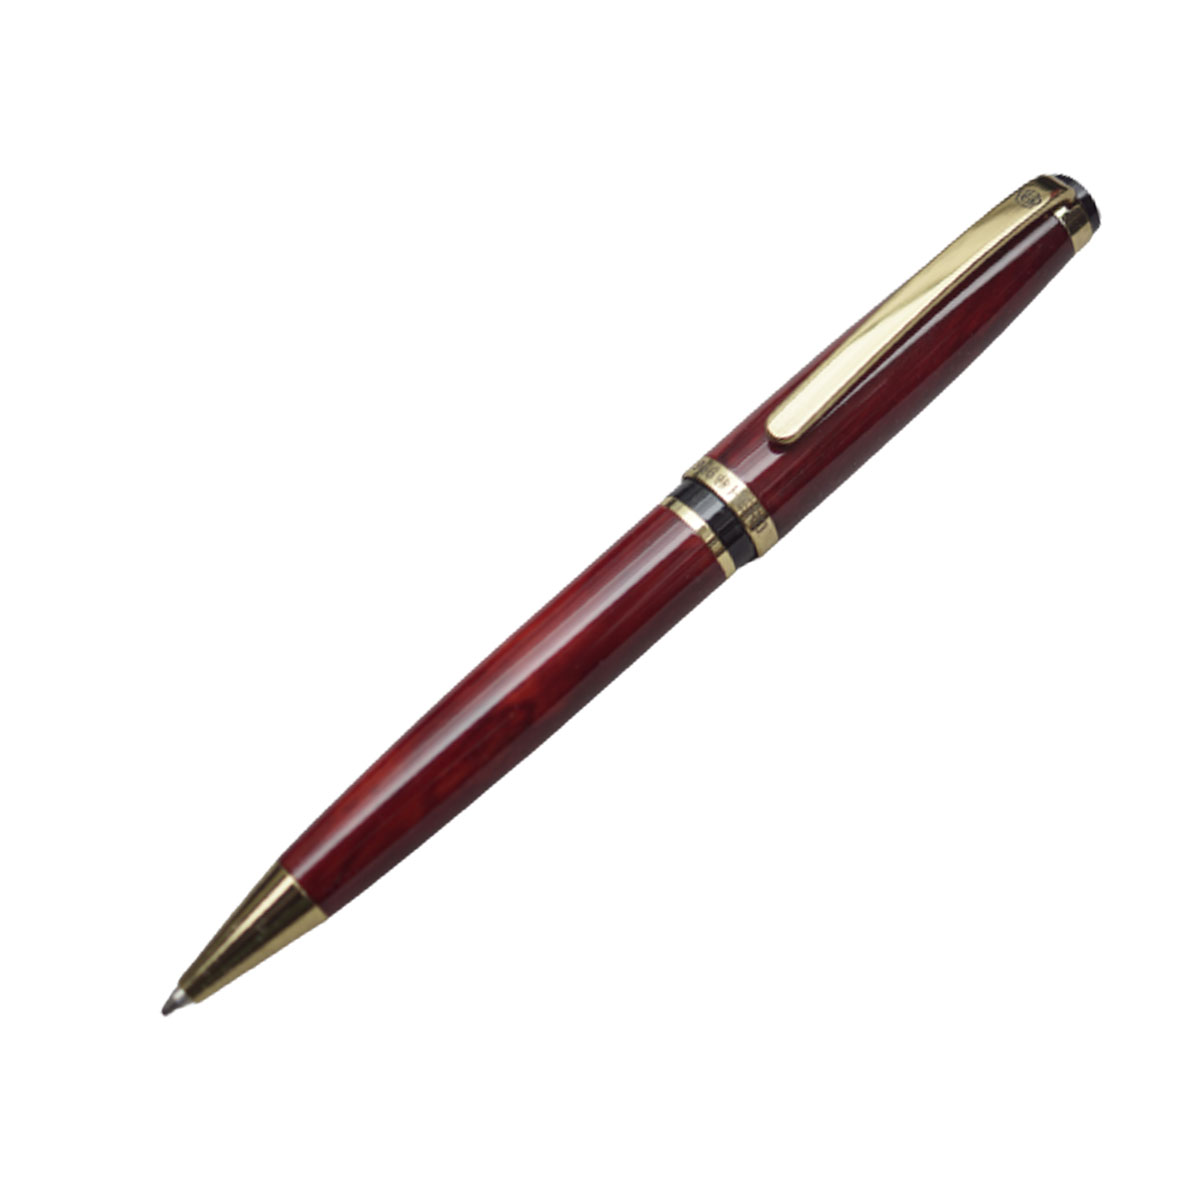 Hero 966 Red Wood Color Body and Cap Medium Tipped Twist Type Ball Pen with Gold Trims SKU 20248